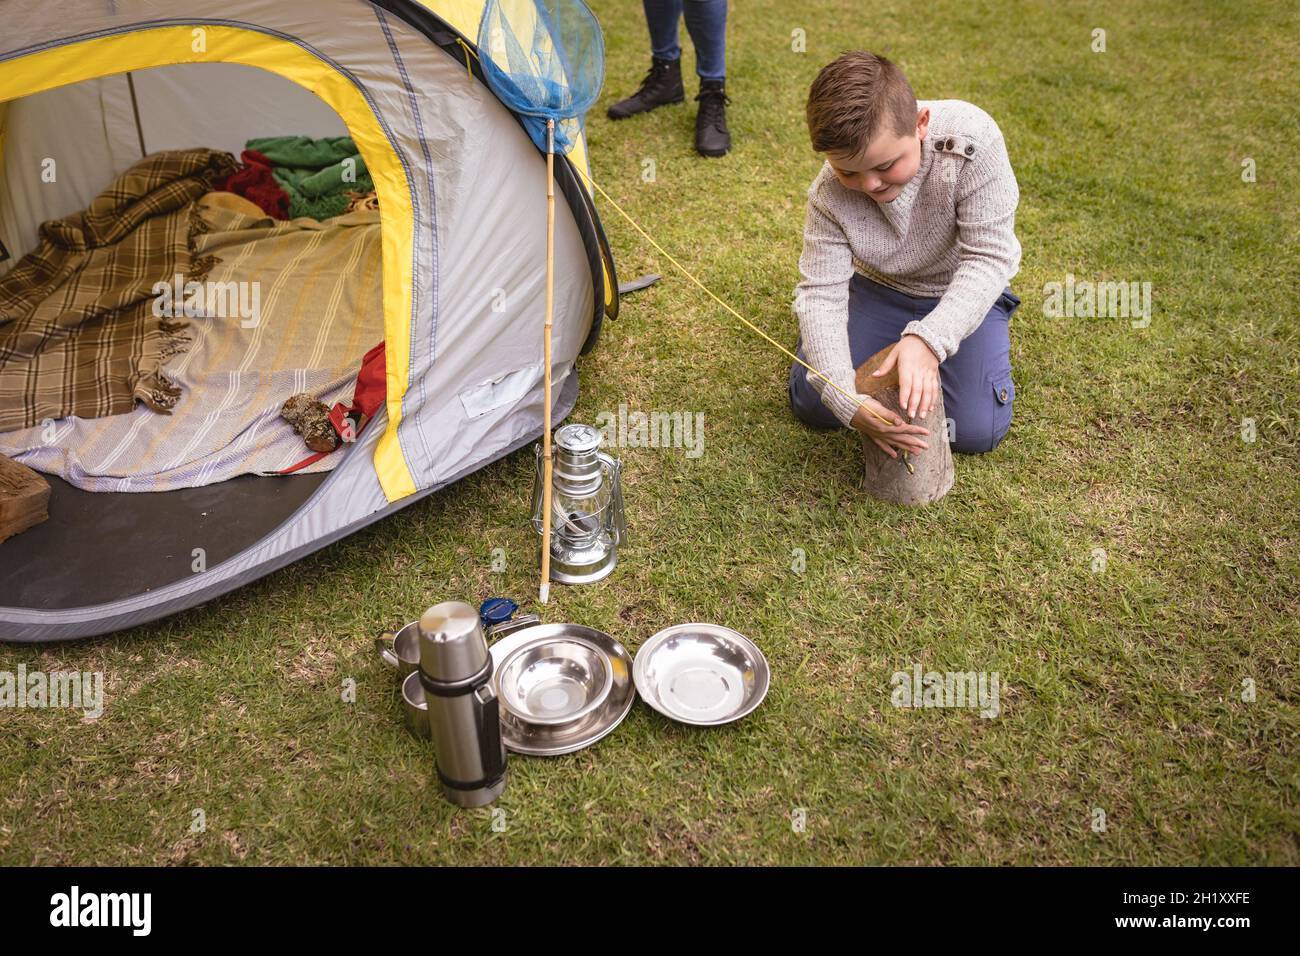 Caucasian boy setting up a tent by tying the strings to a tree log in the garden Stock Photo